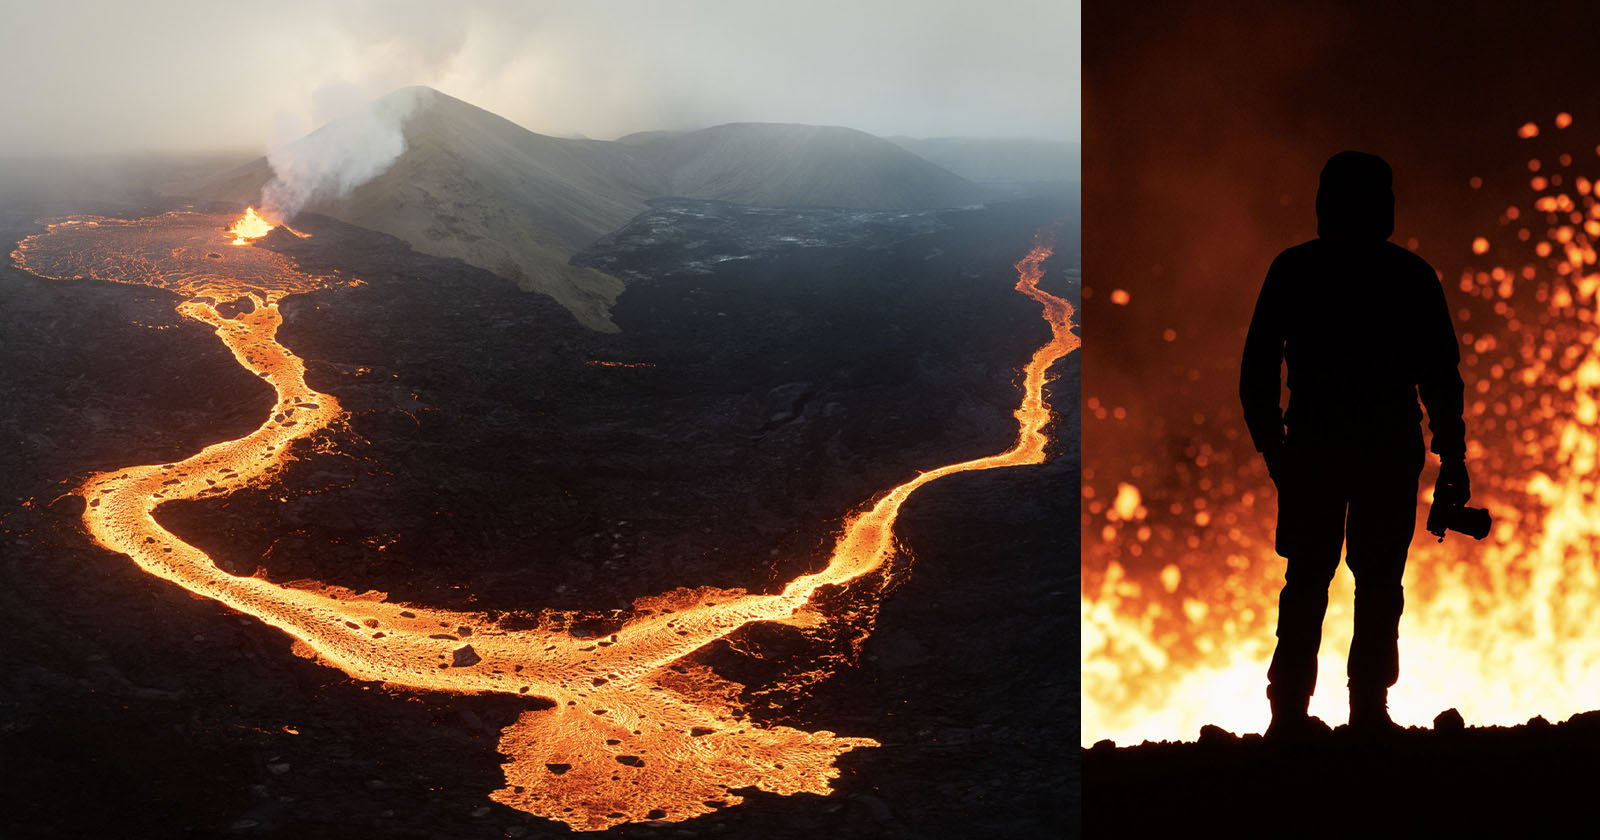 Breathtaking Film and Photos of Iceland’s Recent Volcanic Eruption